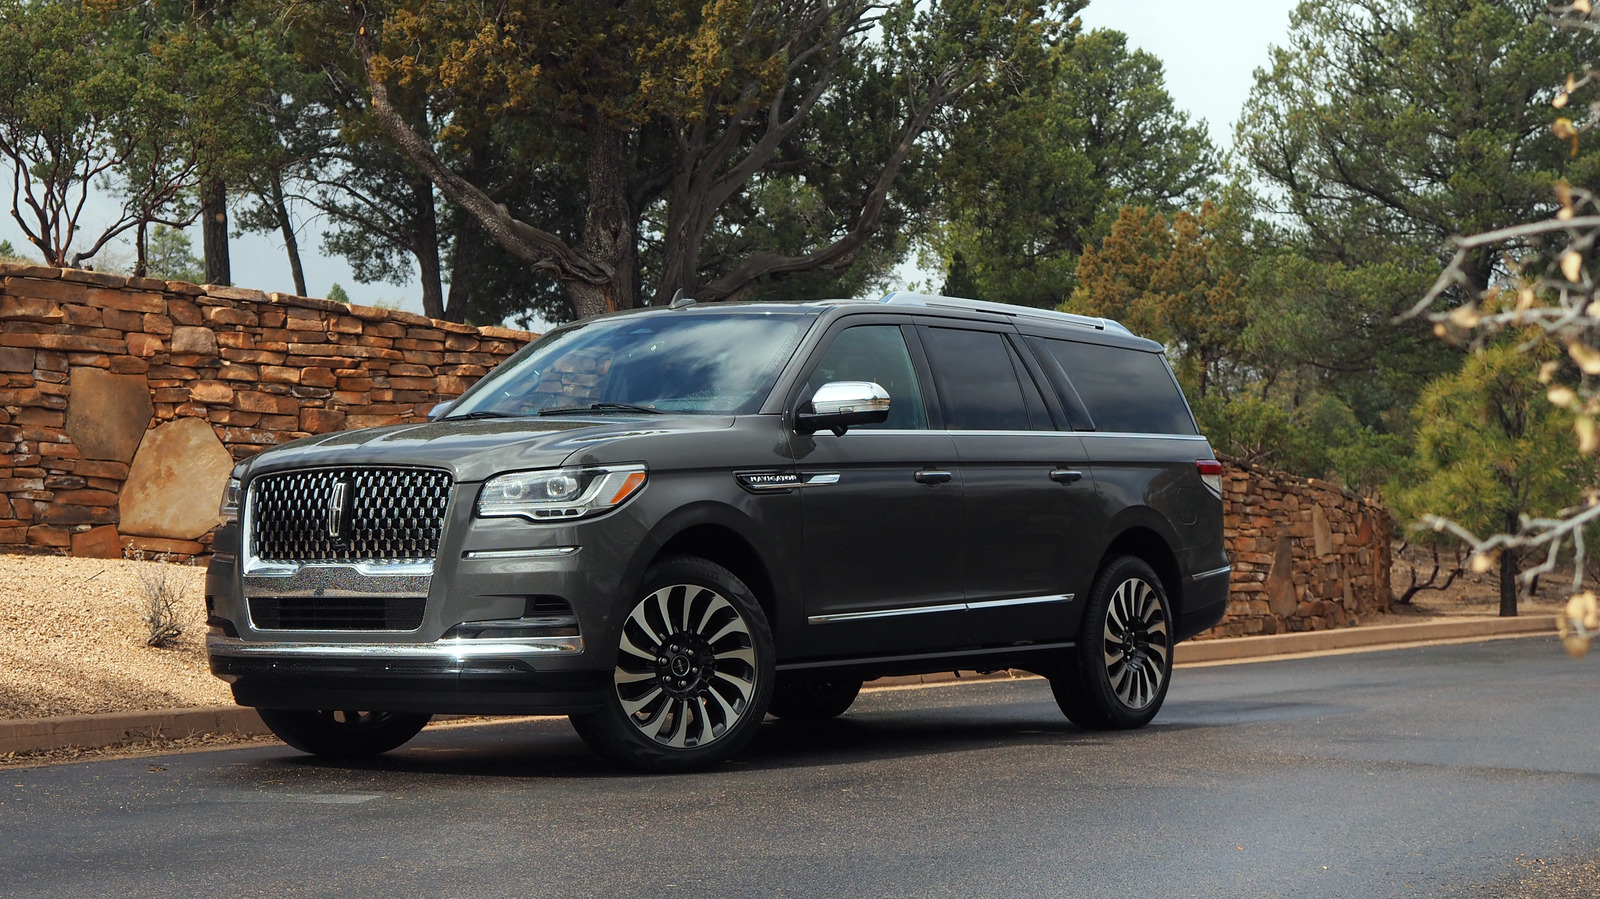 2022 Lincoln Navigator First Drive: Luxury SUV Bets On Hands-Free Tech